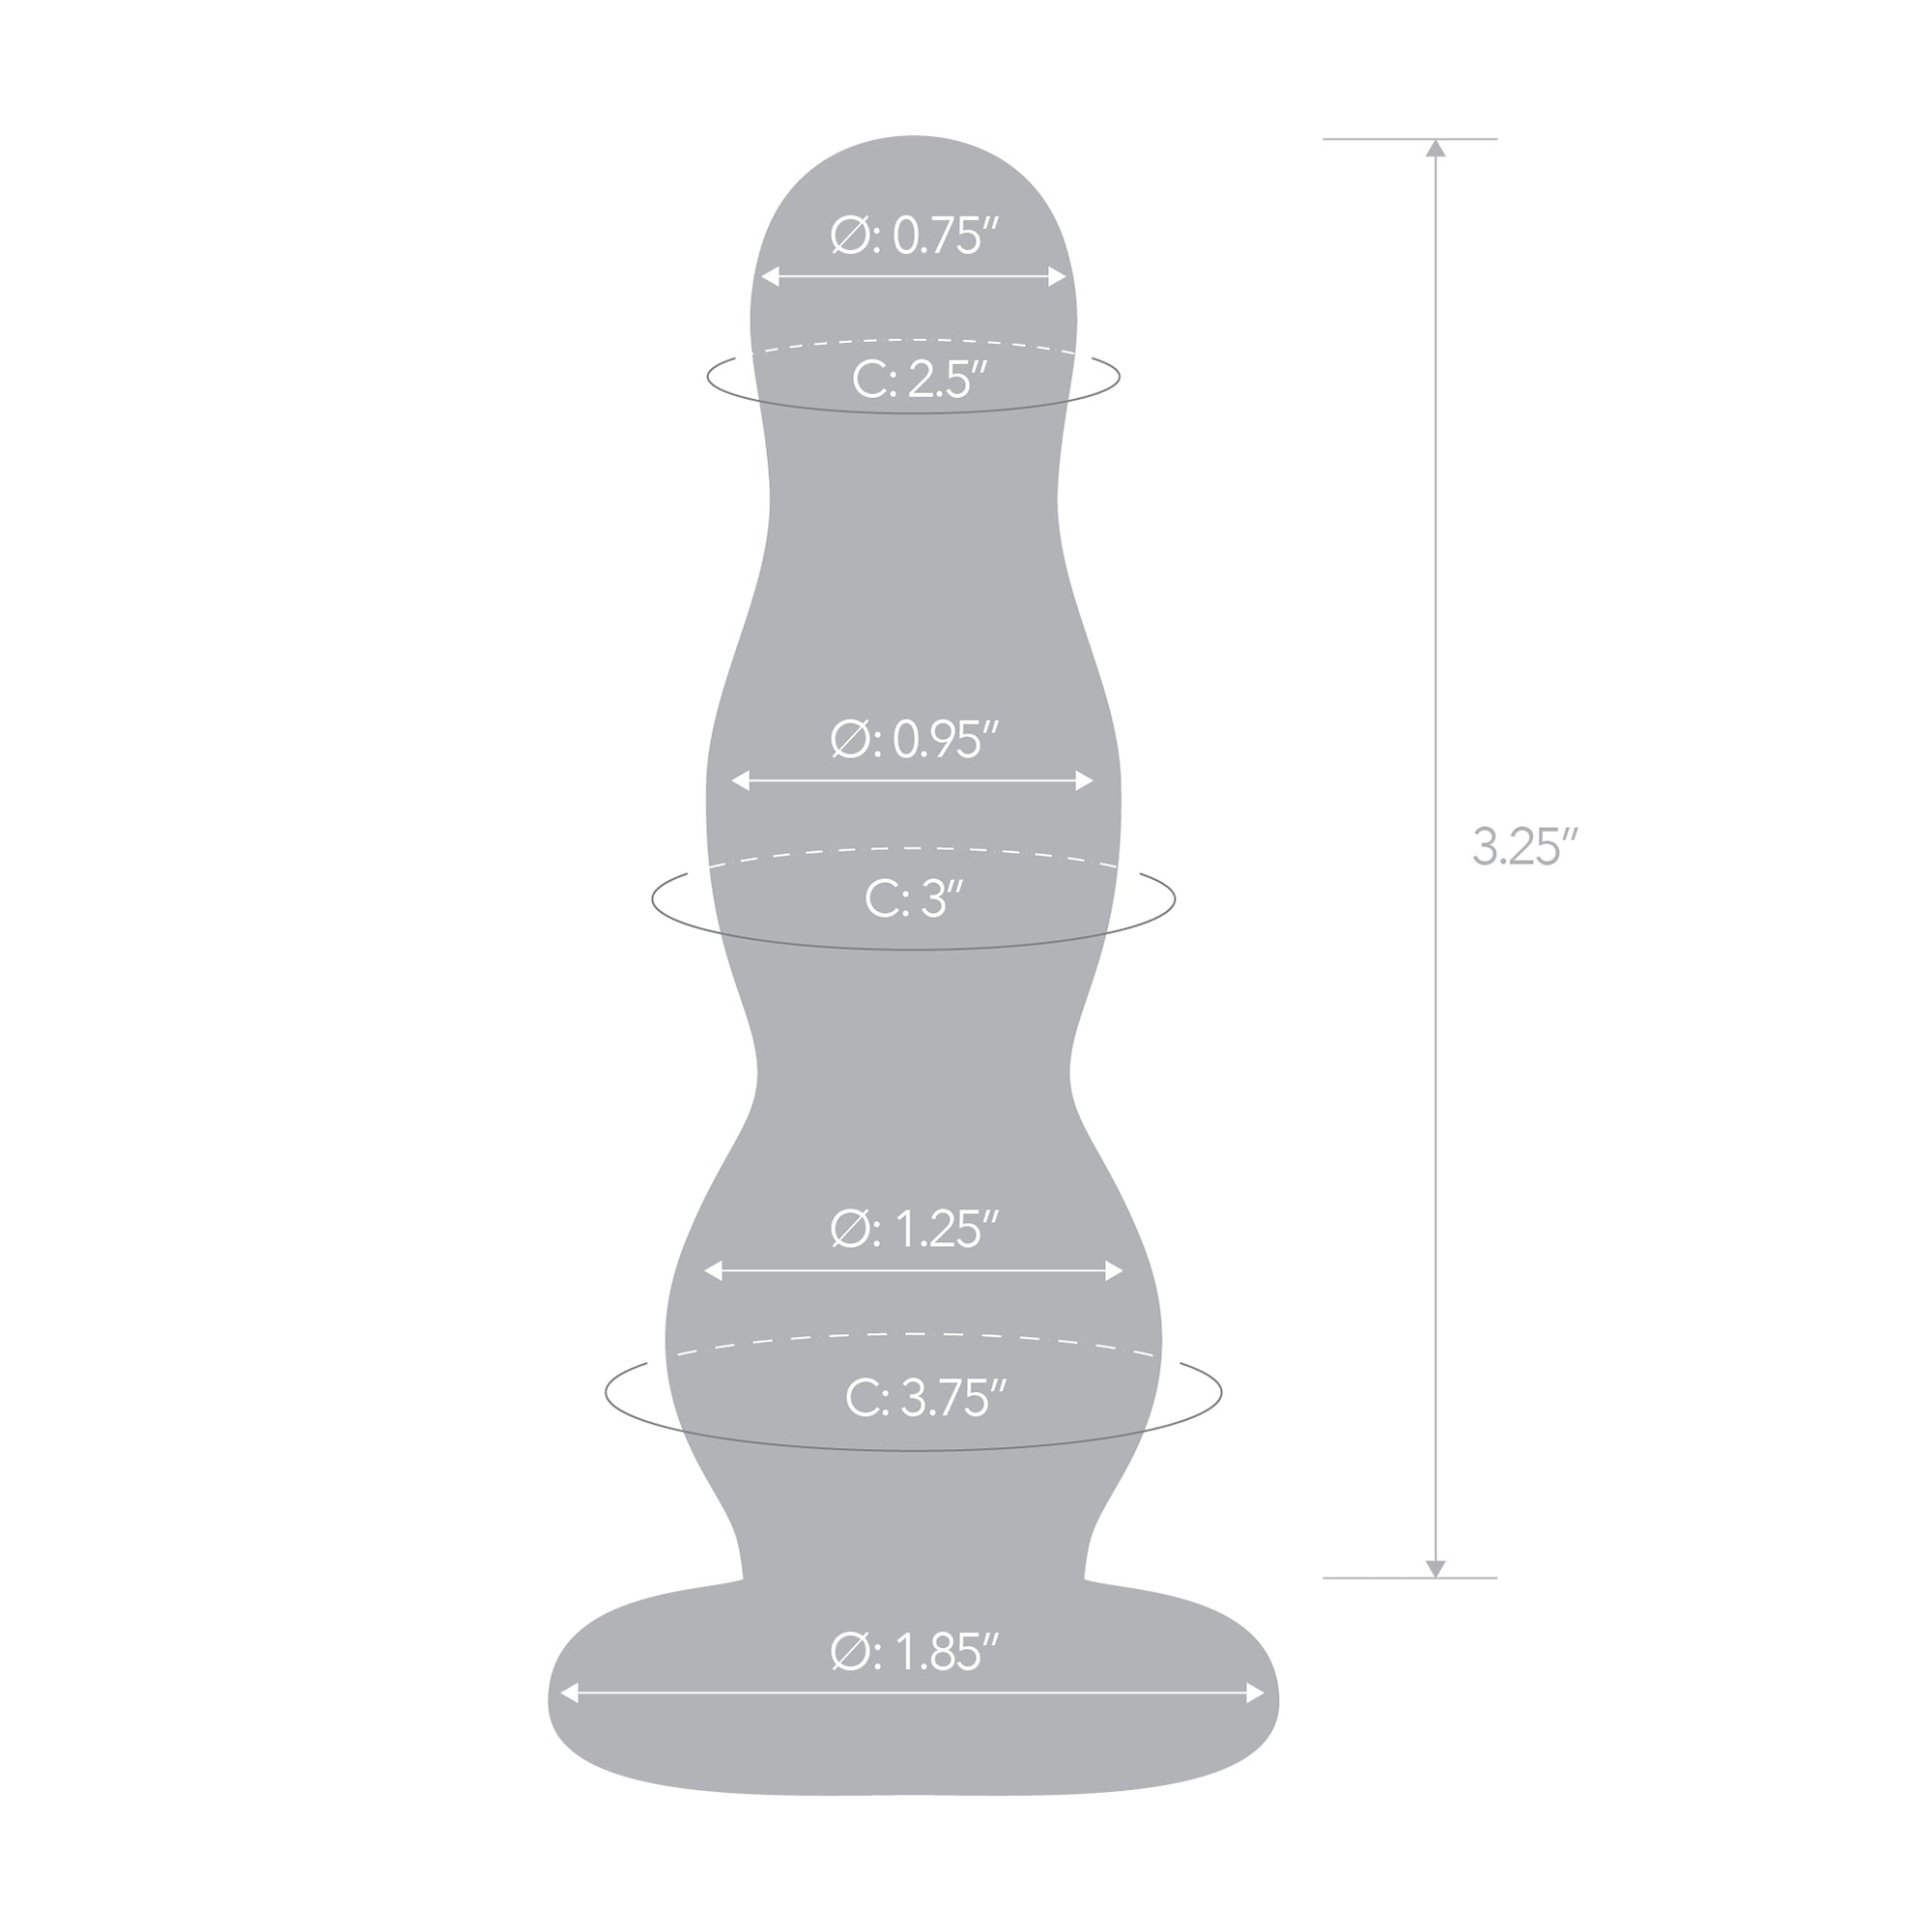 Specifications of the Gläs 4 inch Glass Butt Plug